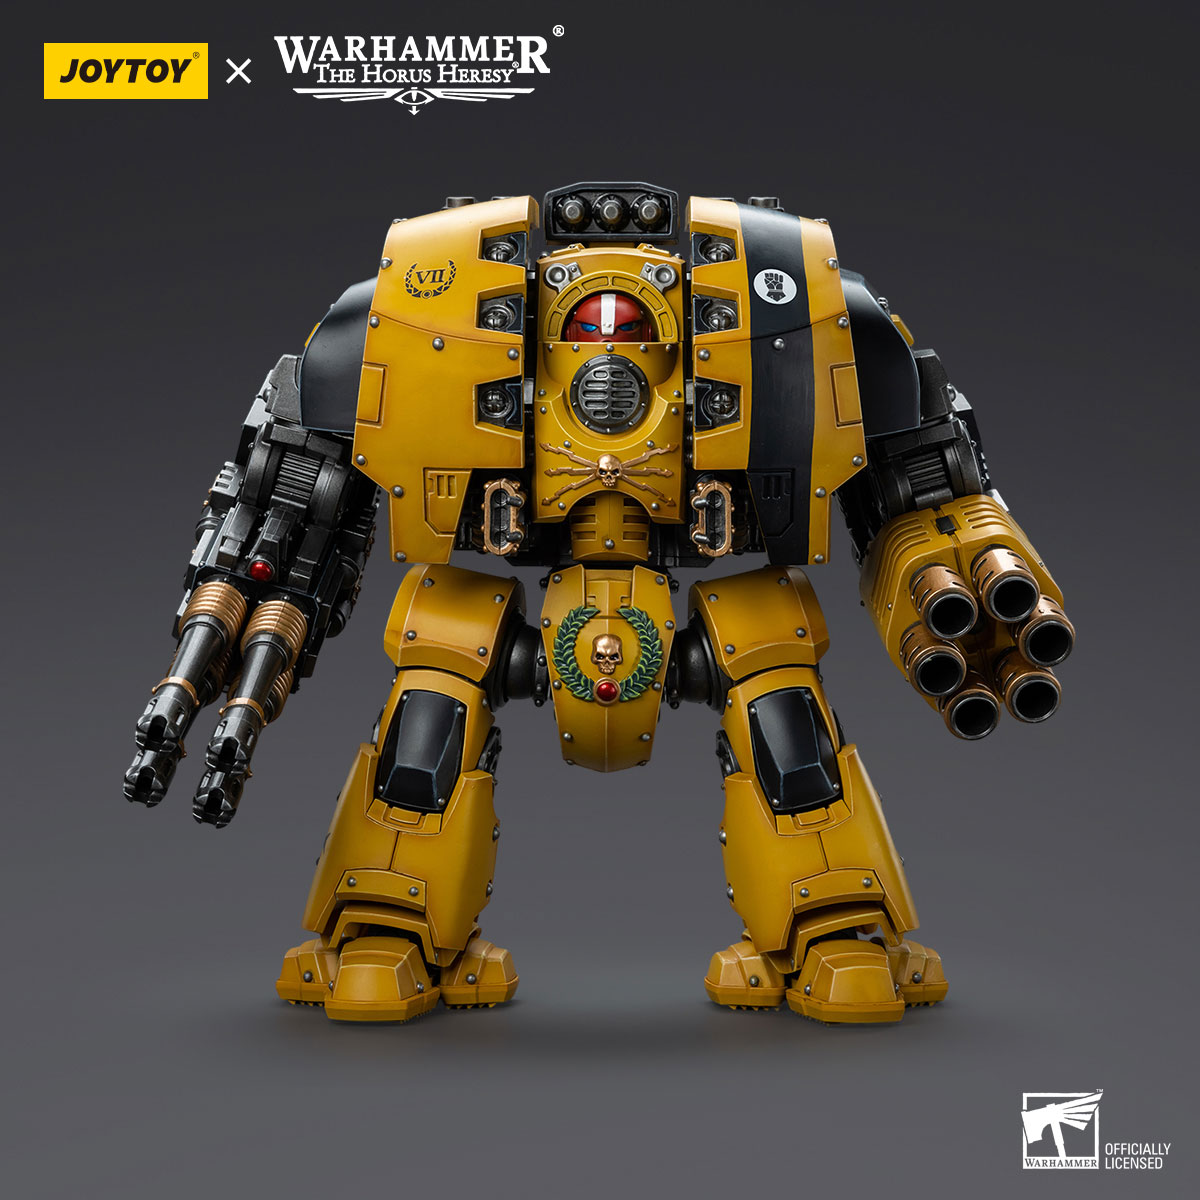 Imperial Fists Leviathan Dreadnought with Cyclonic Melta Lance and Storm Cannon